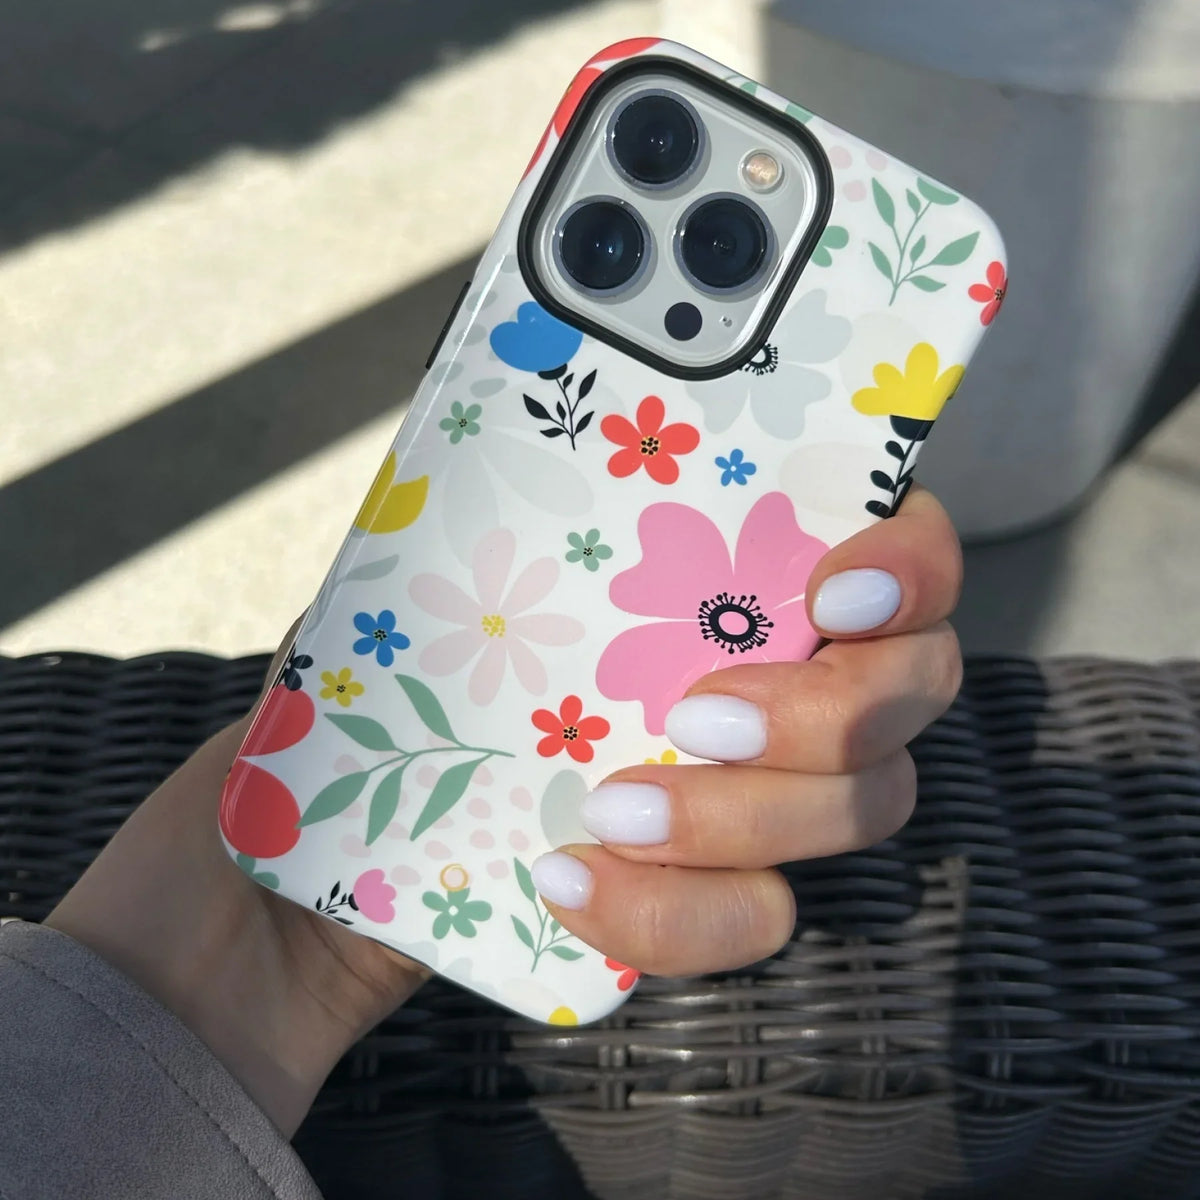 Flower Power iPhone Case - iPhone 12 Cases